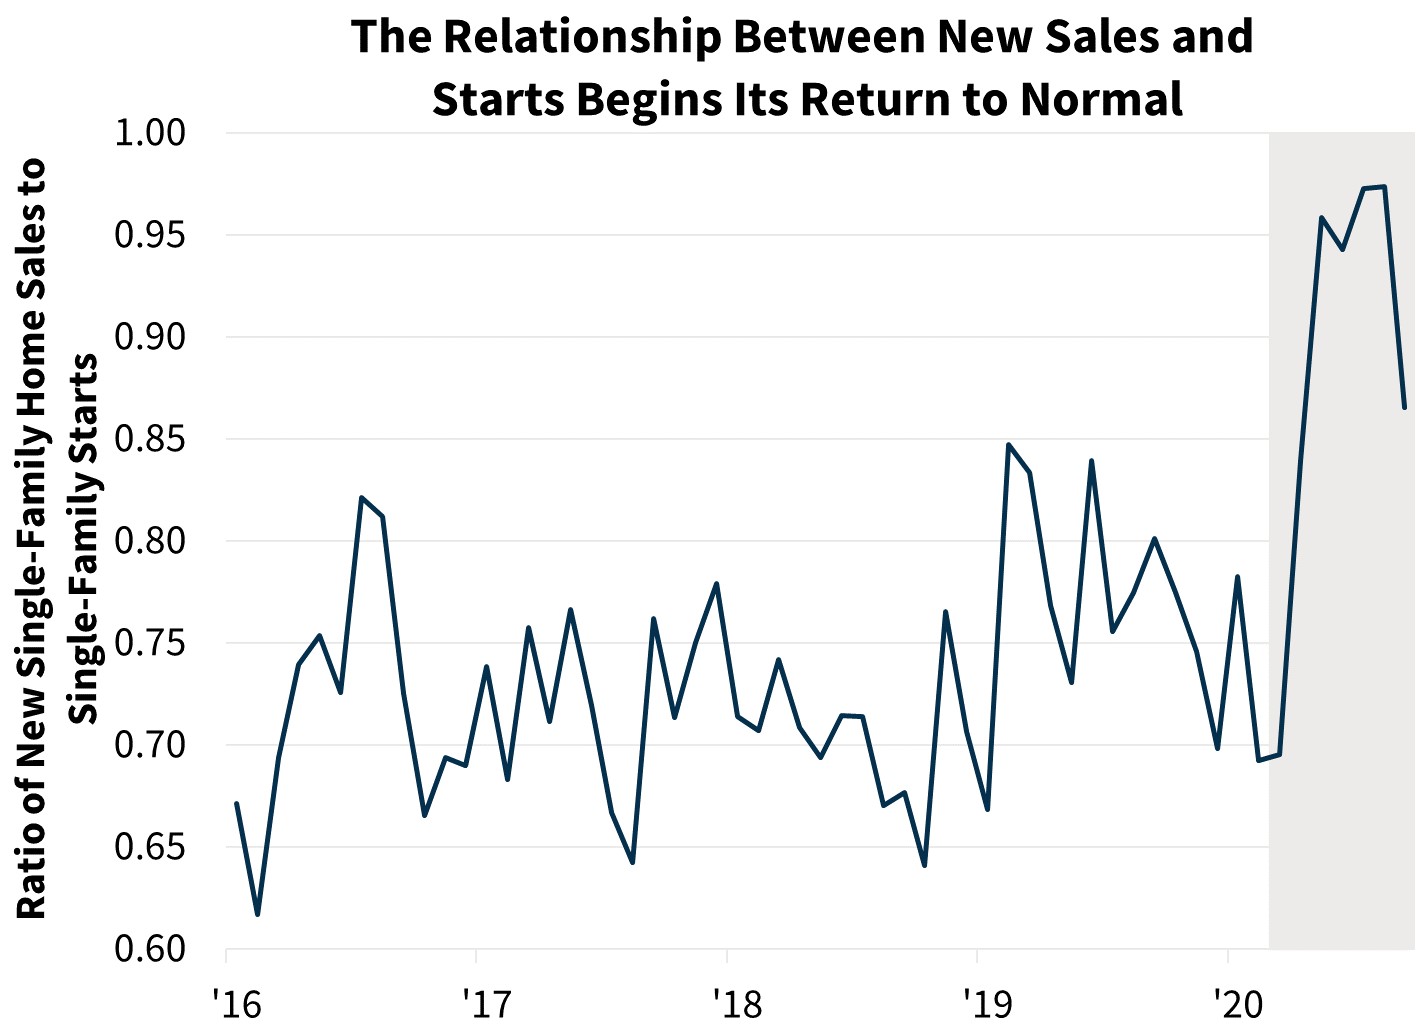  The Relationship Between New Sales and Starts Begins Its Return to Normal